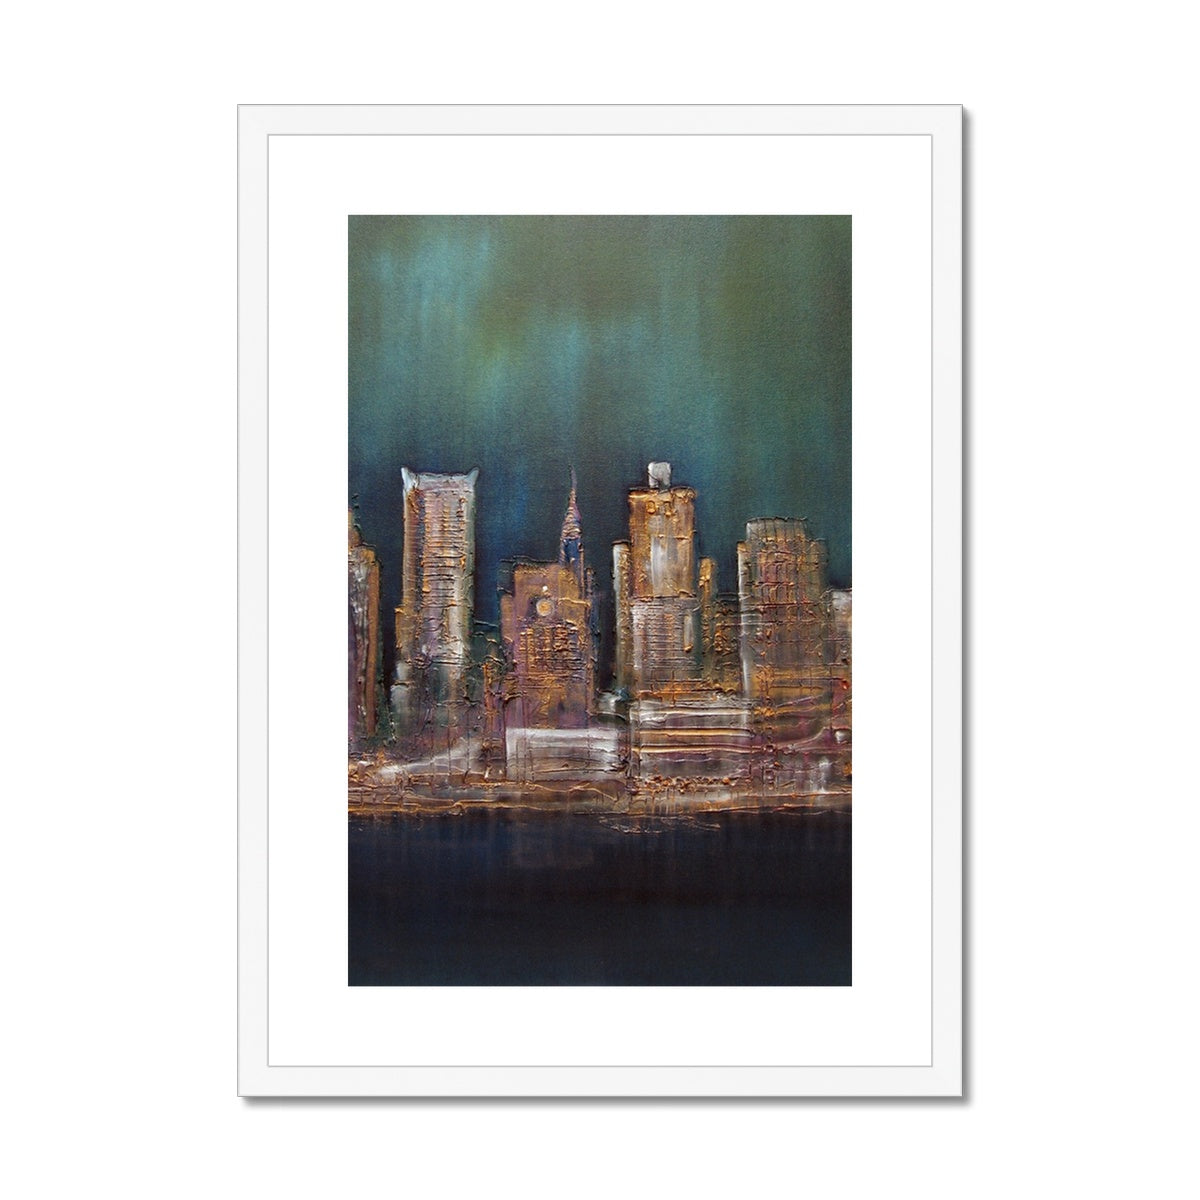 New York West Side Painting | Framed & Mounted Prints From Scotland-Framed & Mounted Prints-World Art Gallery-A2 Portrait-White Frame-Paintings, Prints, Homeware, Art Gifts From Scotland By Scottish Artist Kevin Hunter